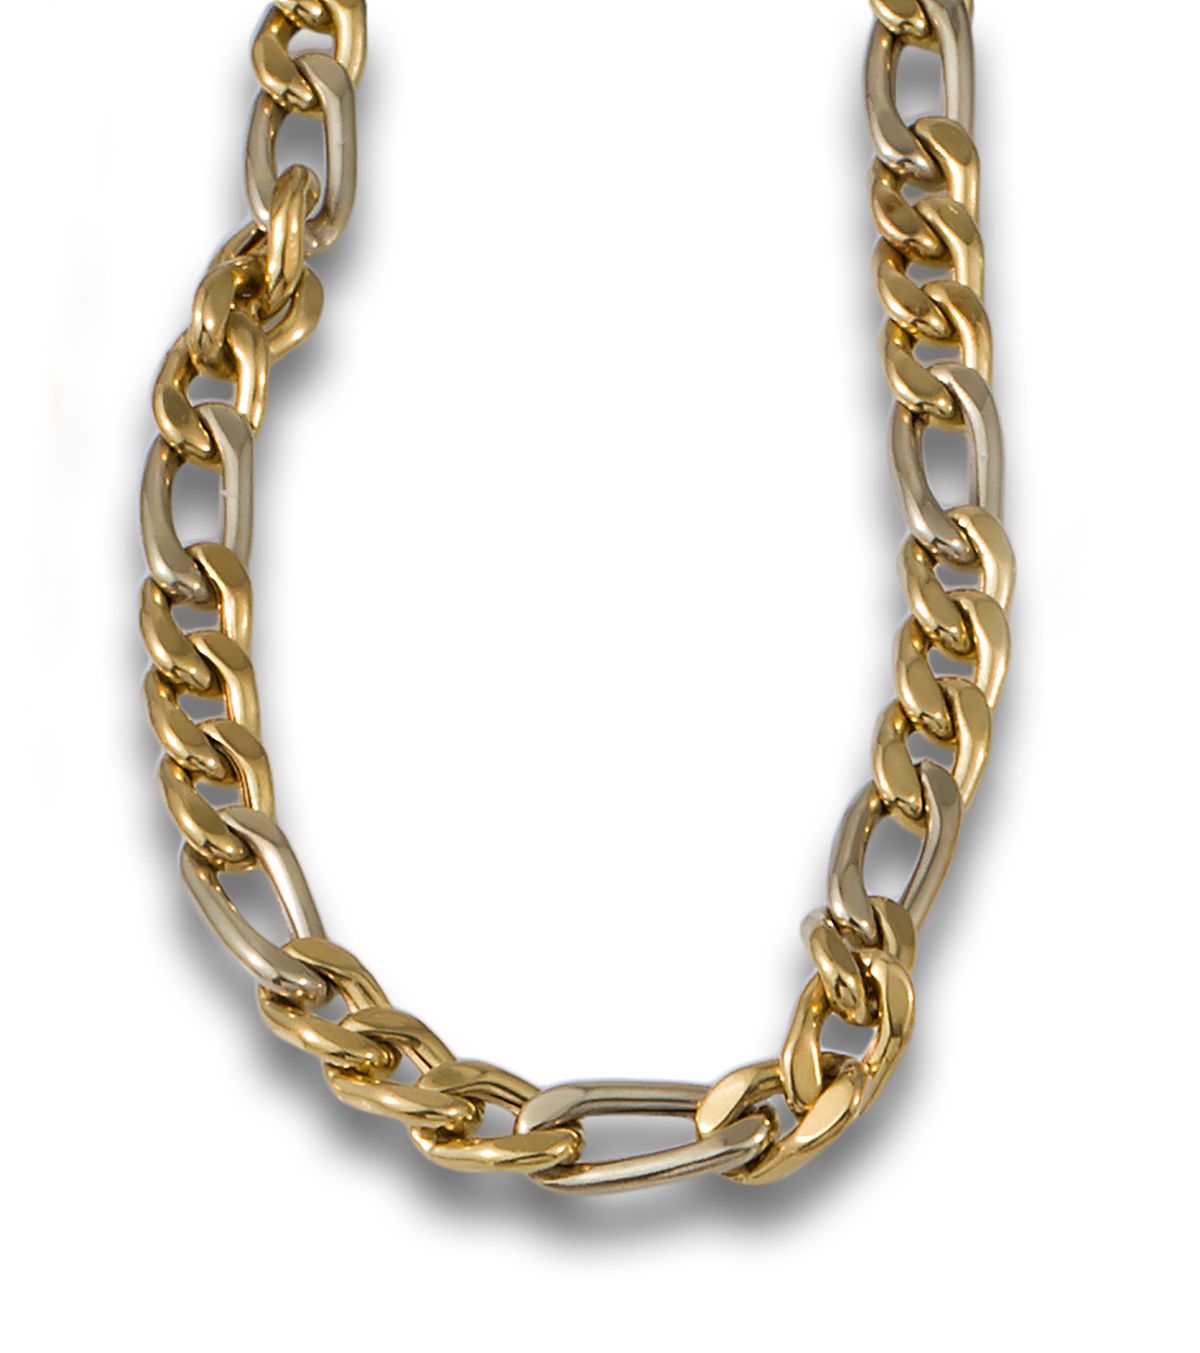 GOLD LINK CHAIN Long bearded chain in 18kt yellow and white gold. Closed length:&hellip;